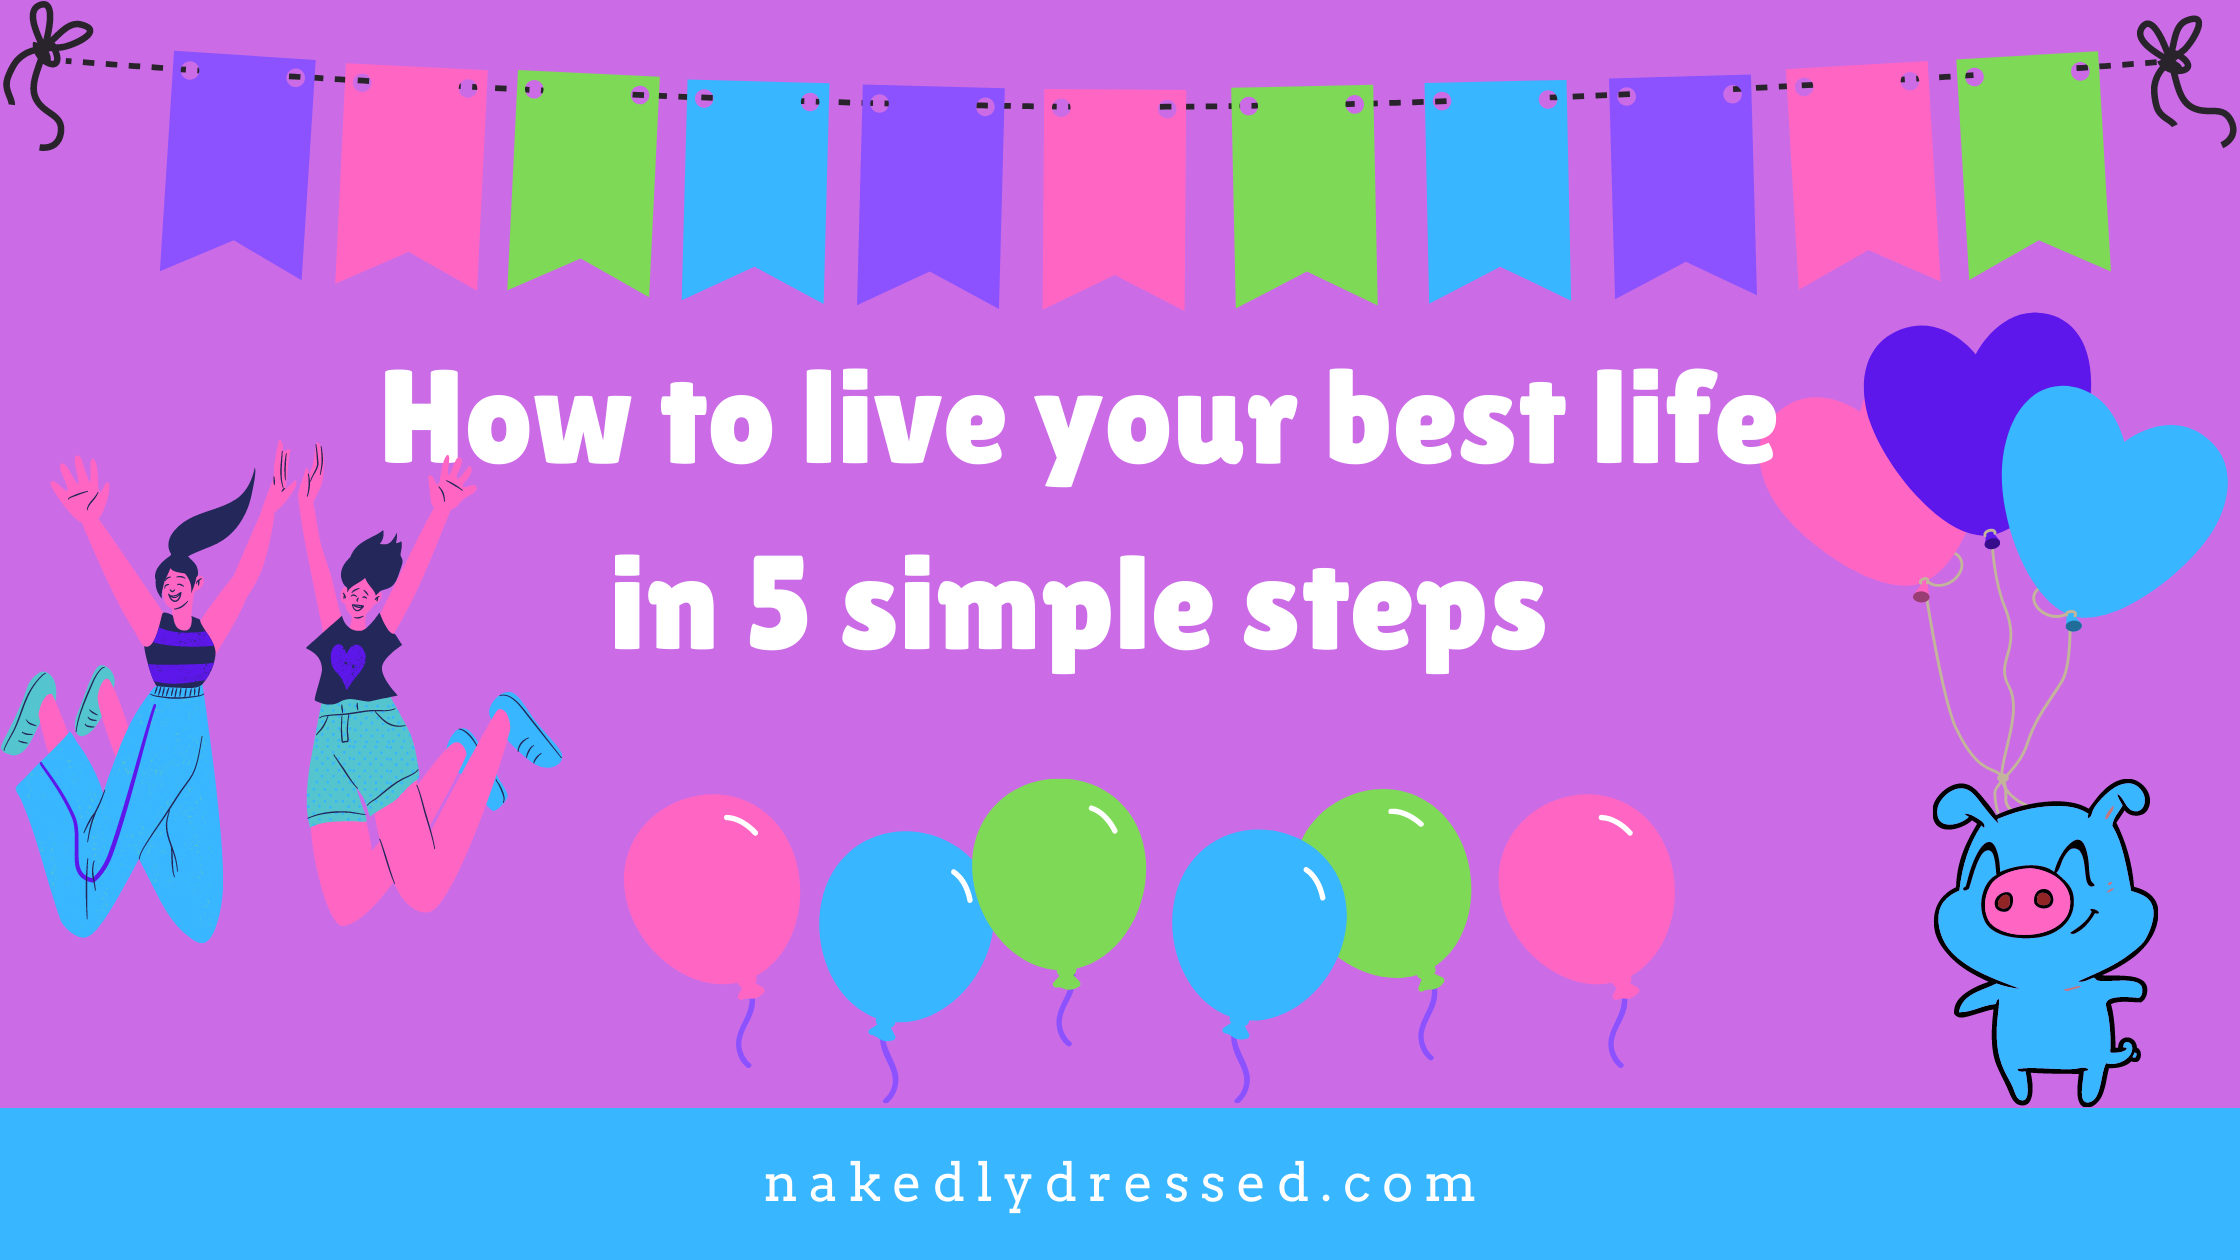 How to live your best life in 5 simple steps